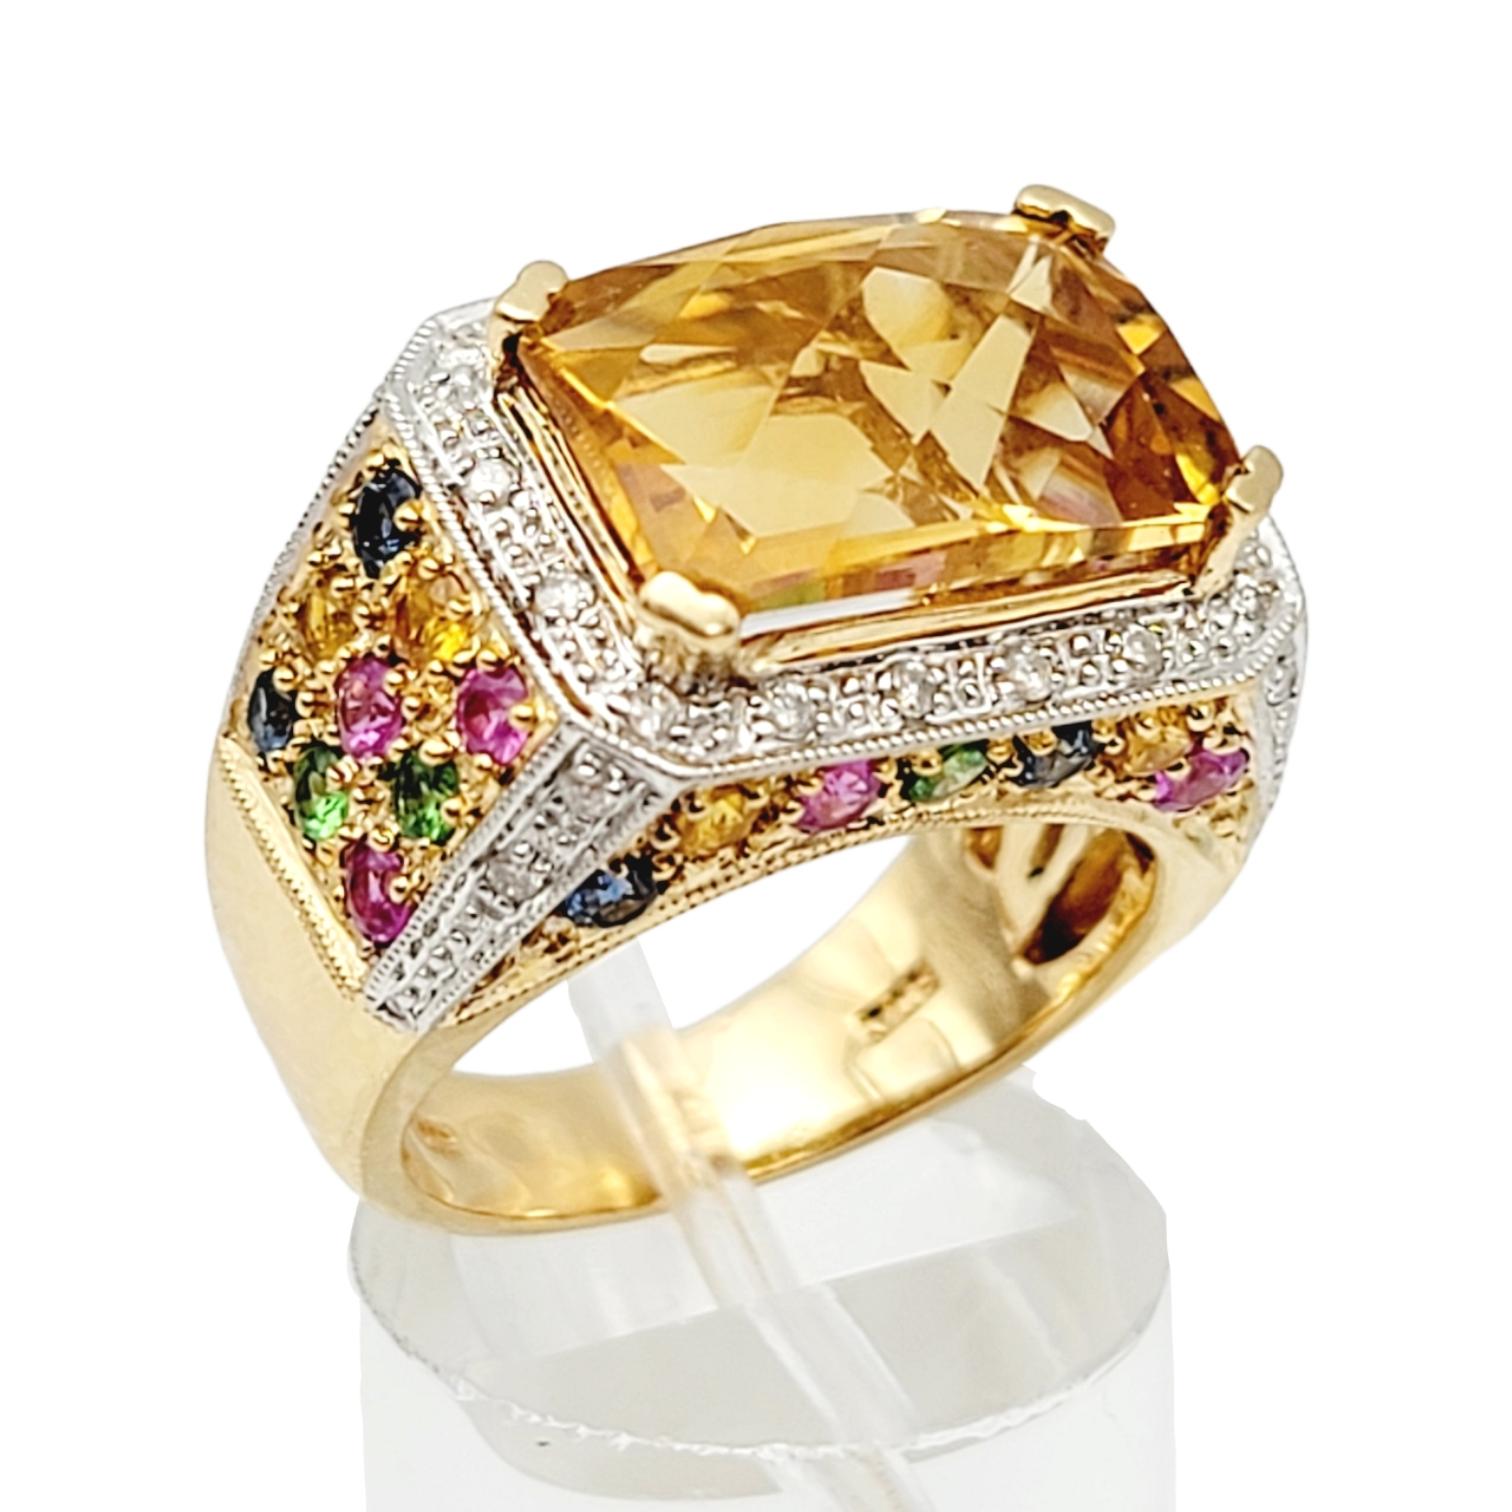 Rectangular Checkerboard Citrine and Multi Gemstone 14 Karat Gold Cocktail Ring In Good Condition For Sale In Scottsdale, AZ